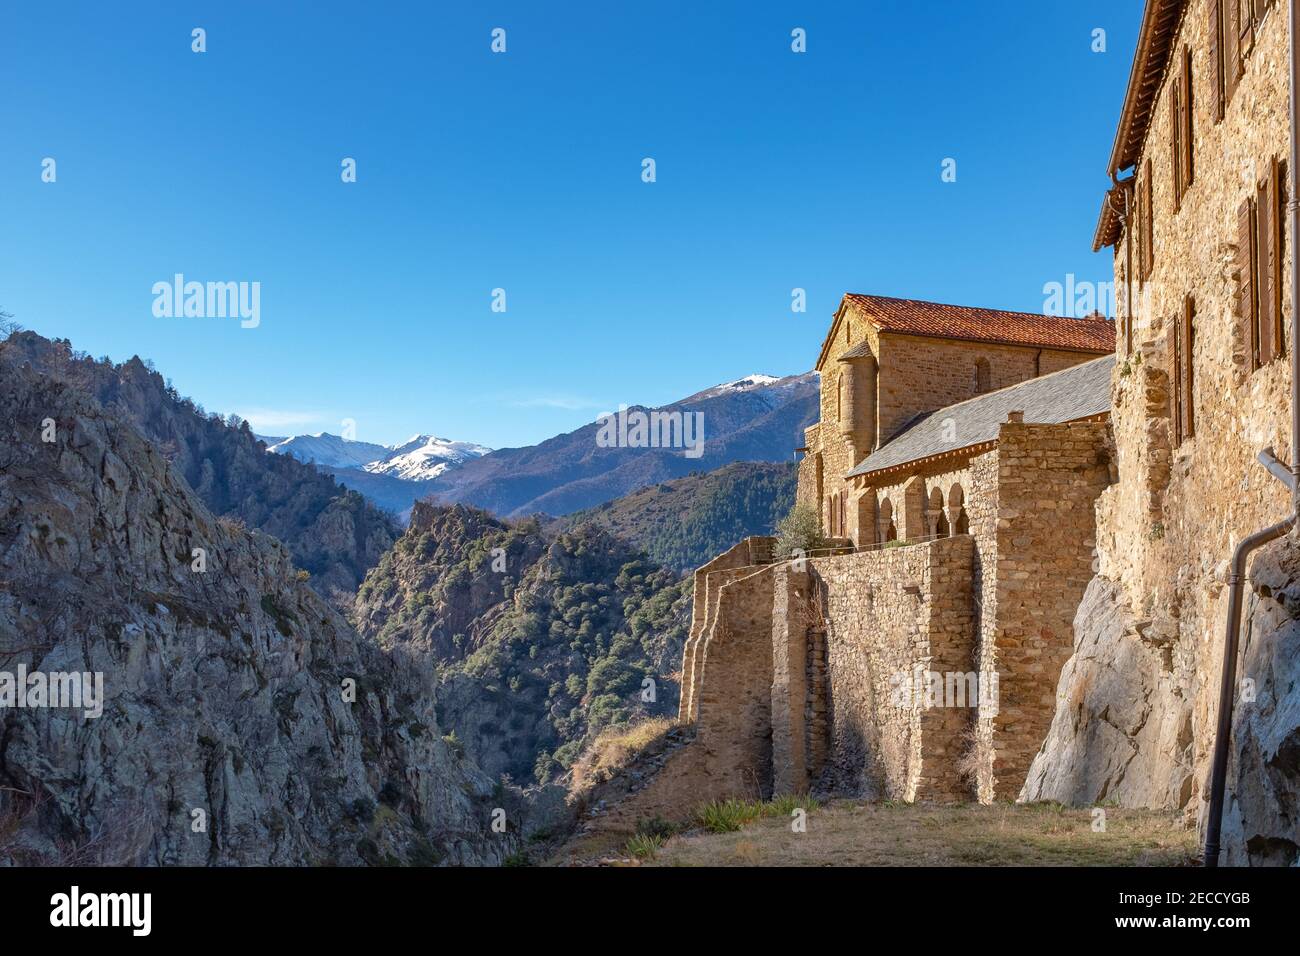 View on the Pyrenean mountains covered with snow from the Abbey of Saint-Martin-du-Canigou located in southern France Stock Photo